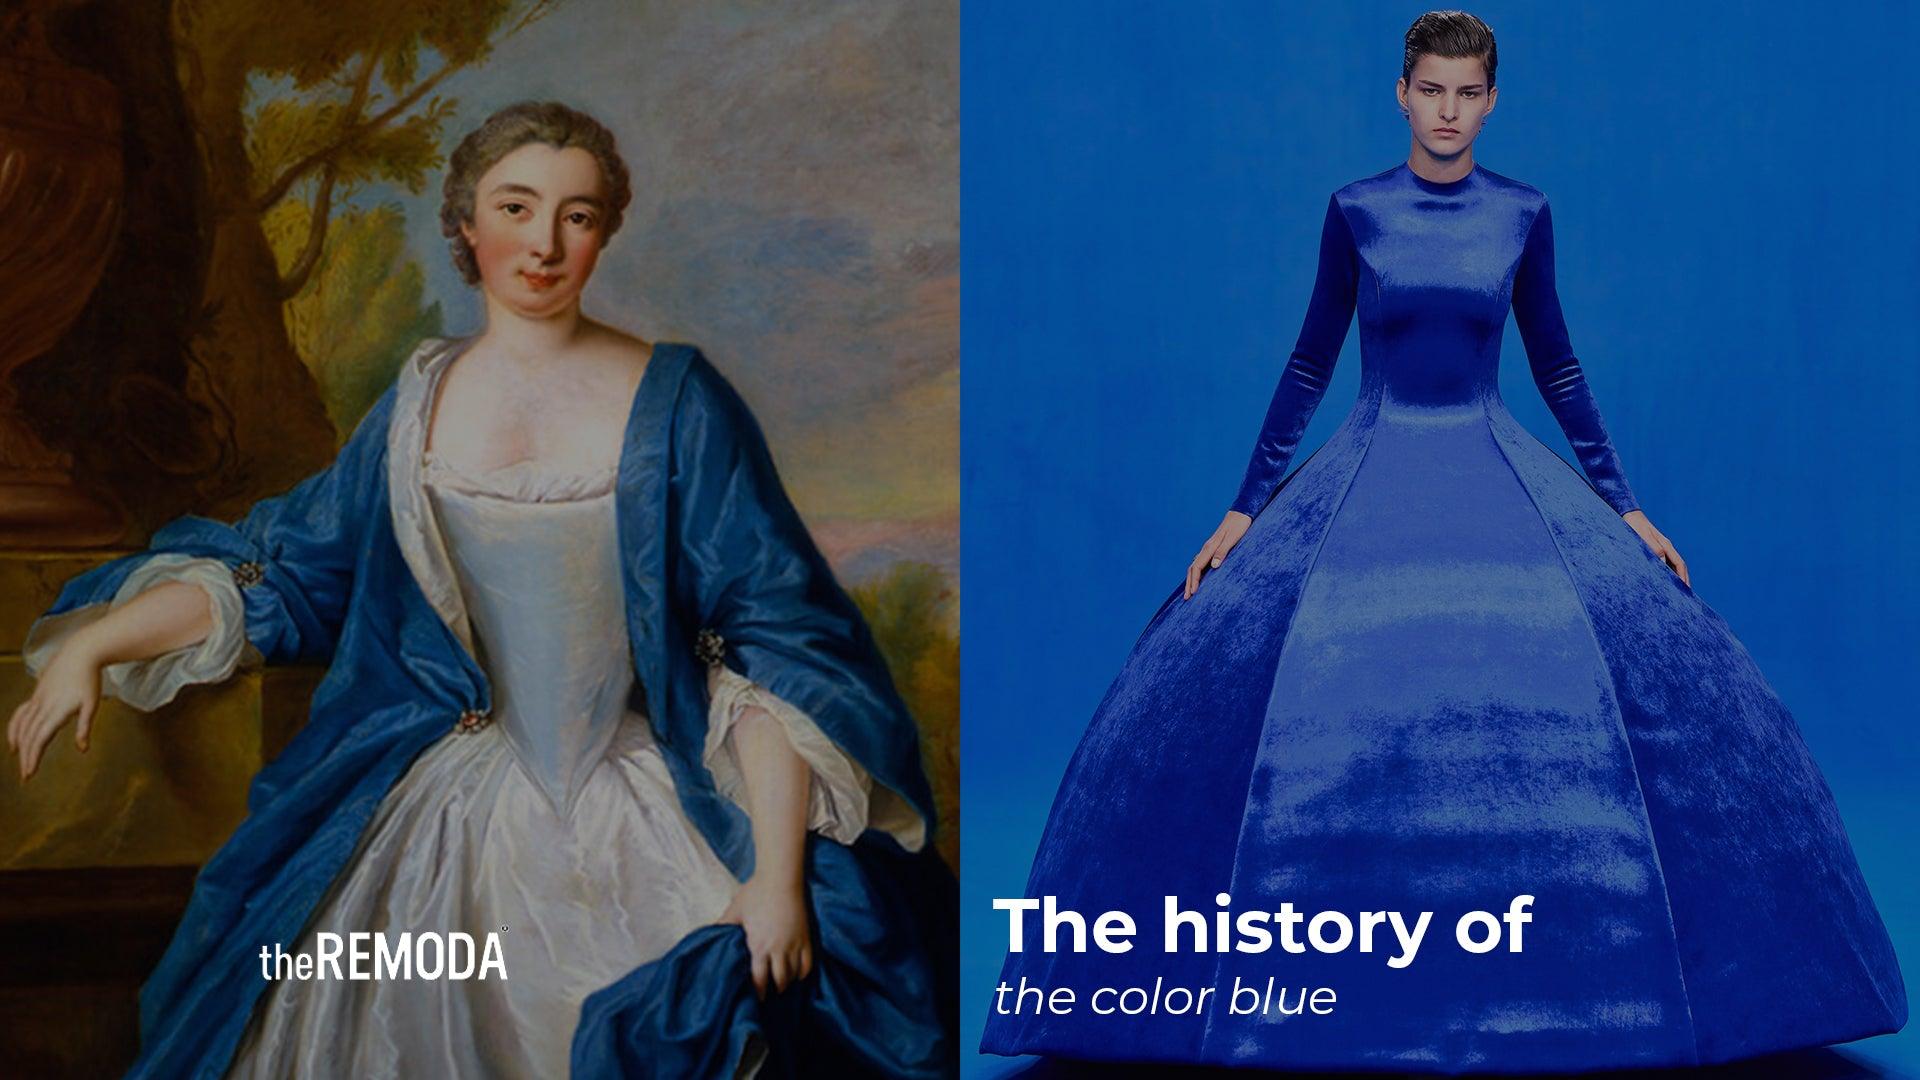 The history of color blue - theREMODA